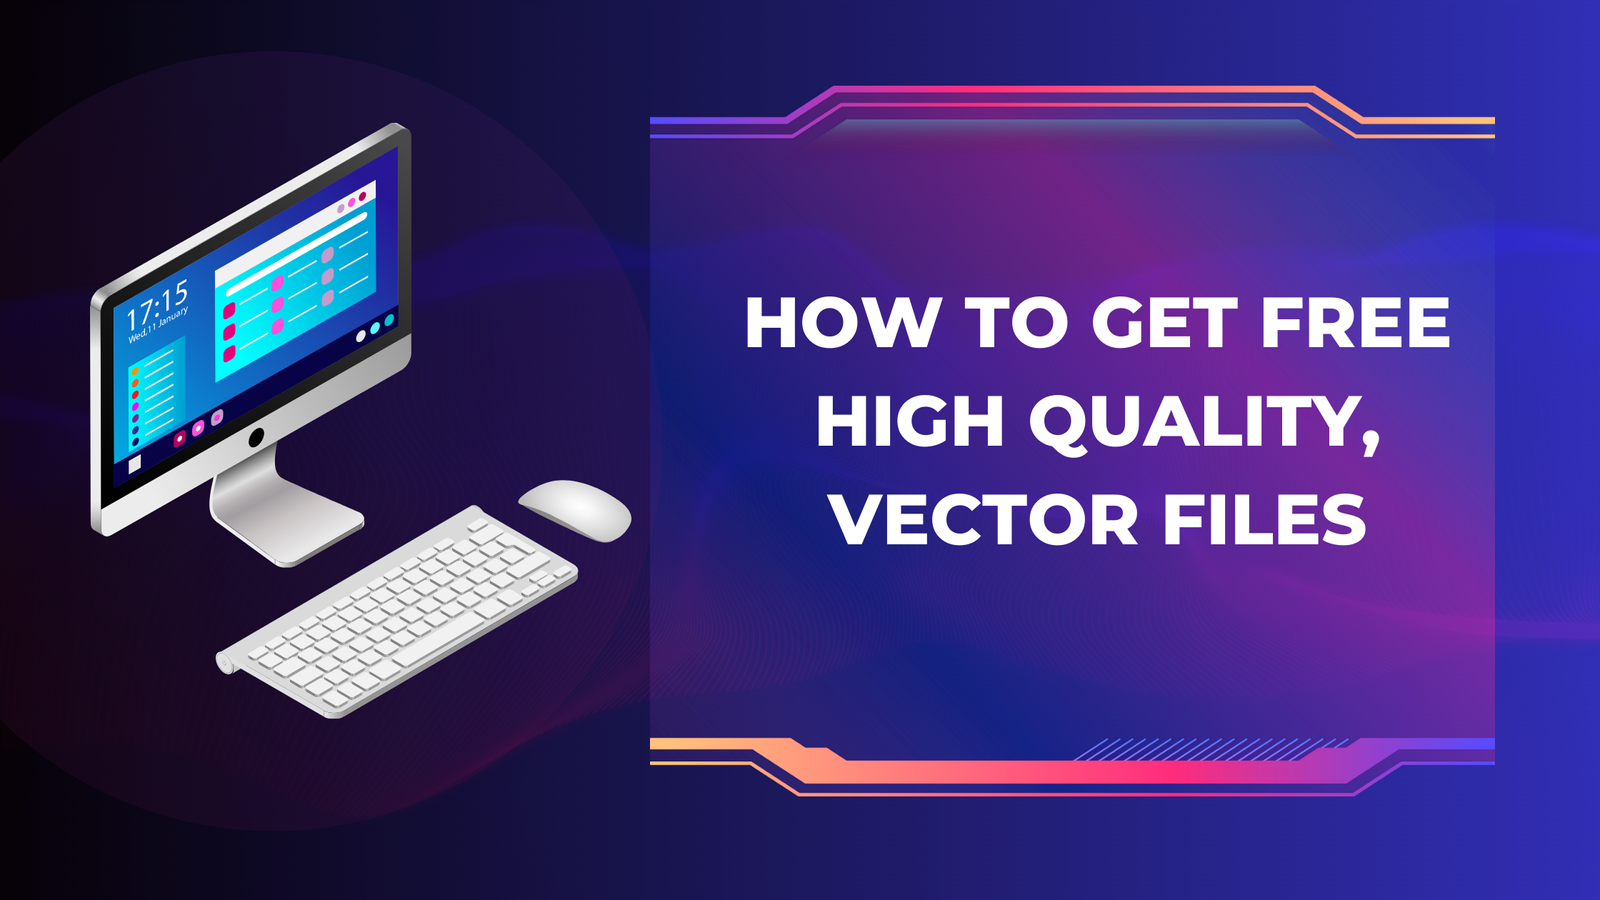 How To Get Free High Quality, Vector Files